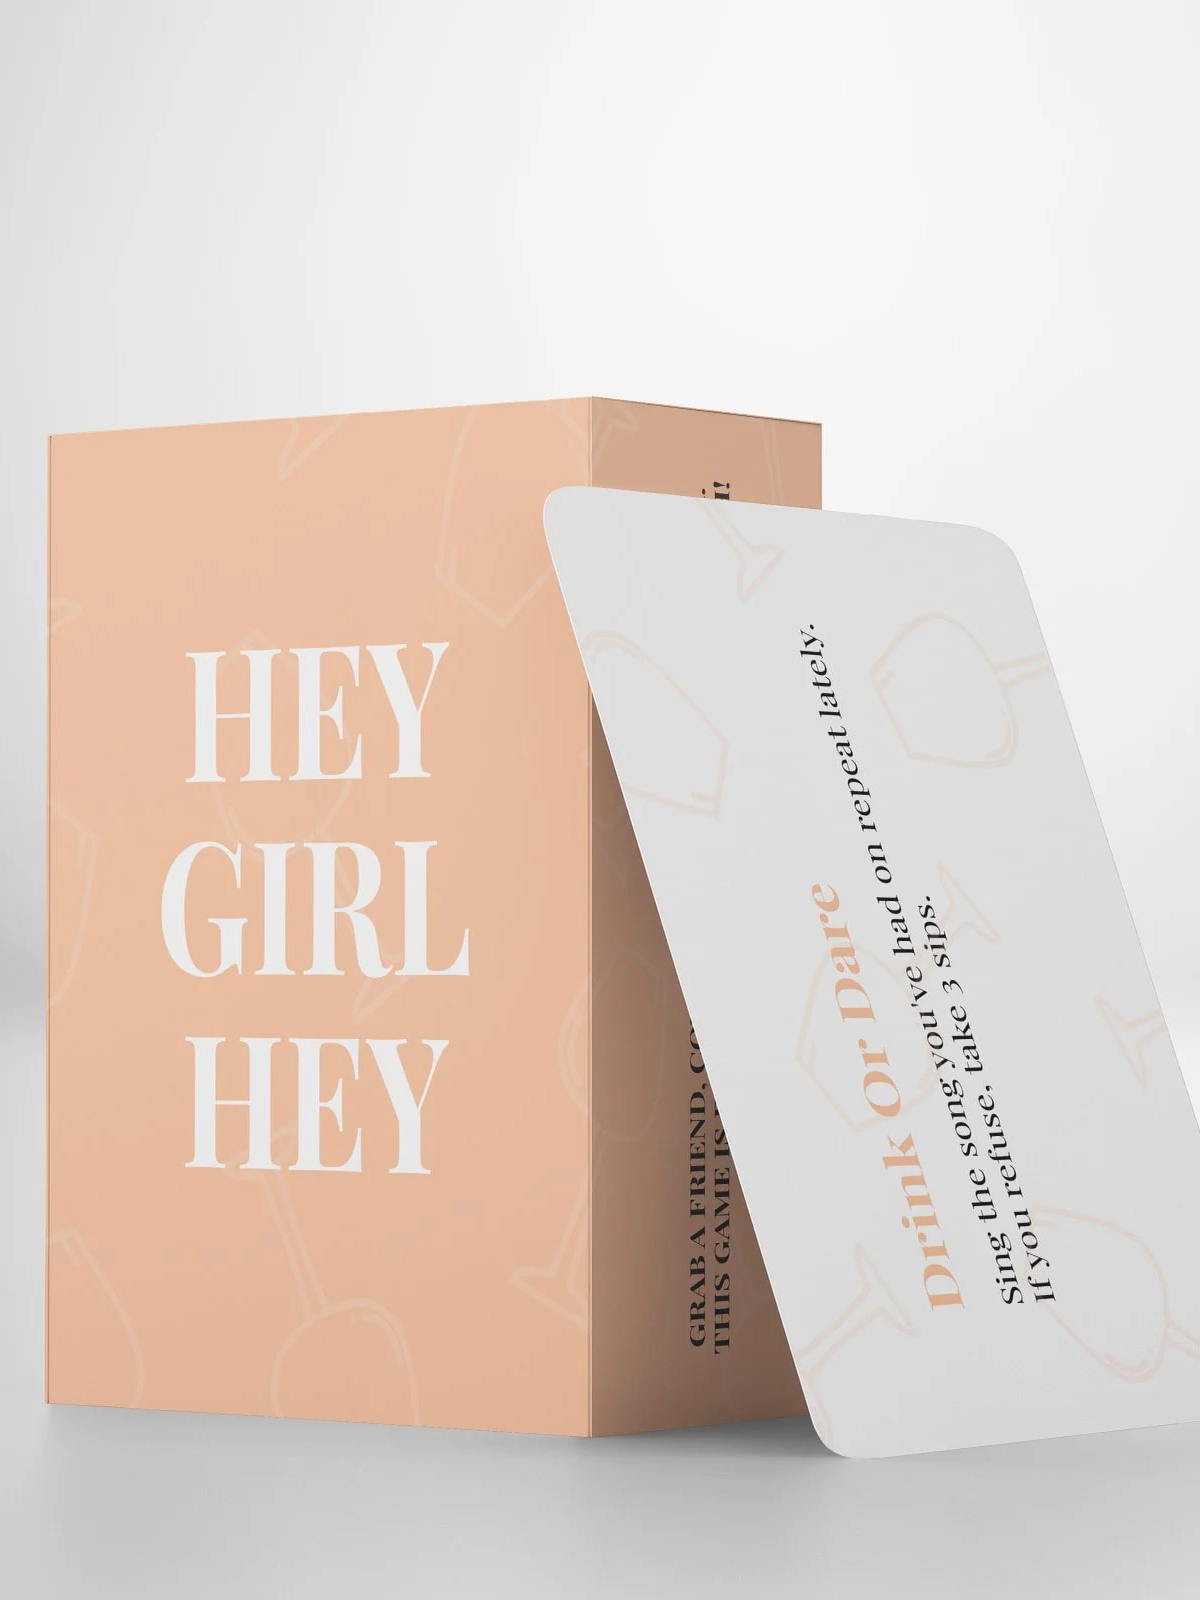 Hey Girl Hey card game packaging with a greeting phrase and playful text on a light background.